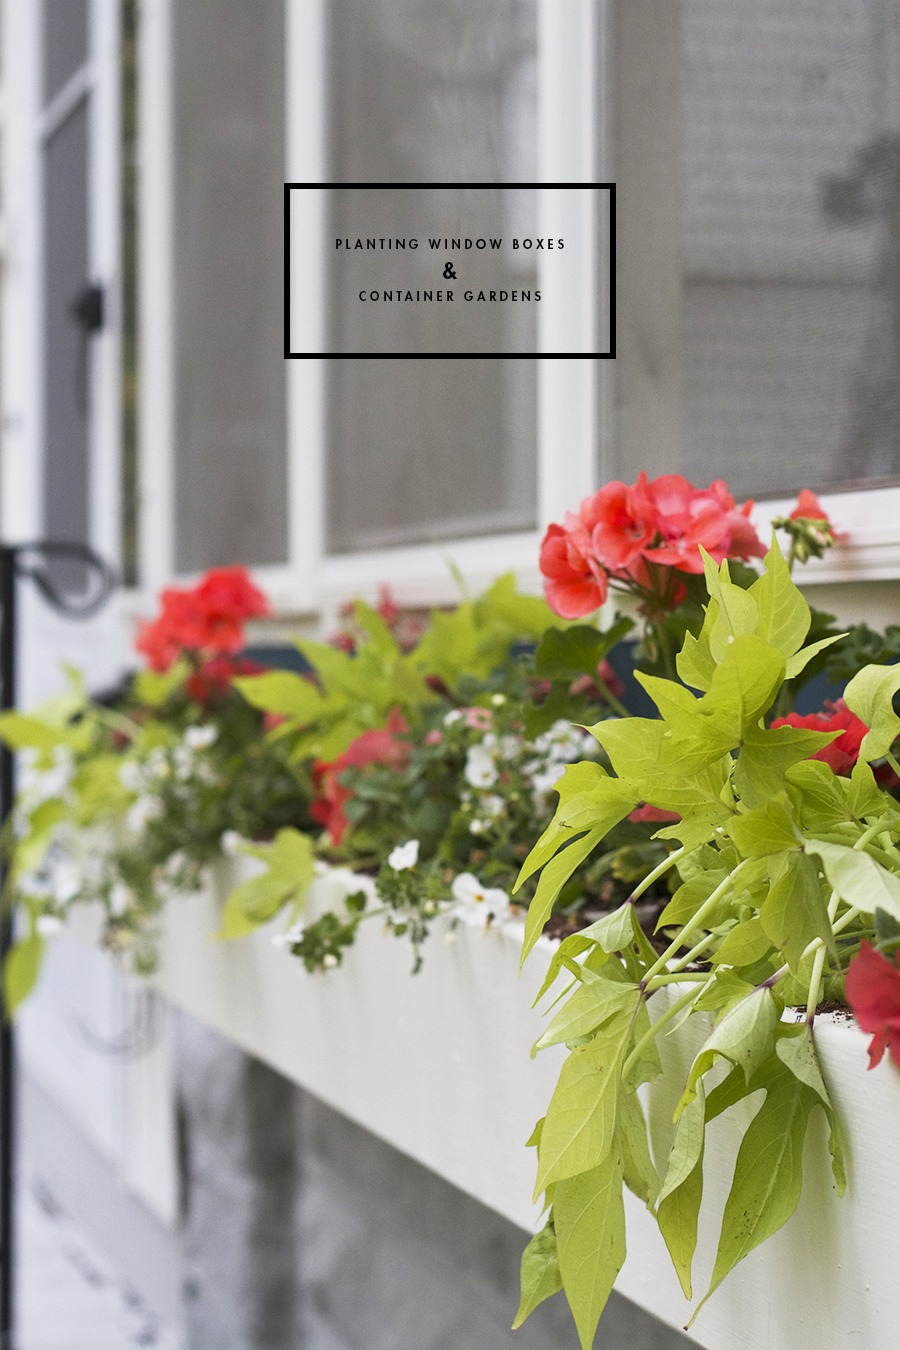 How To Plant a Window Box or Container Garden